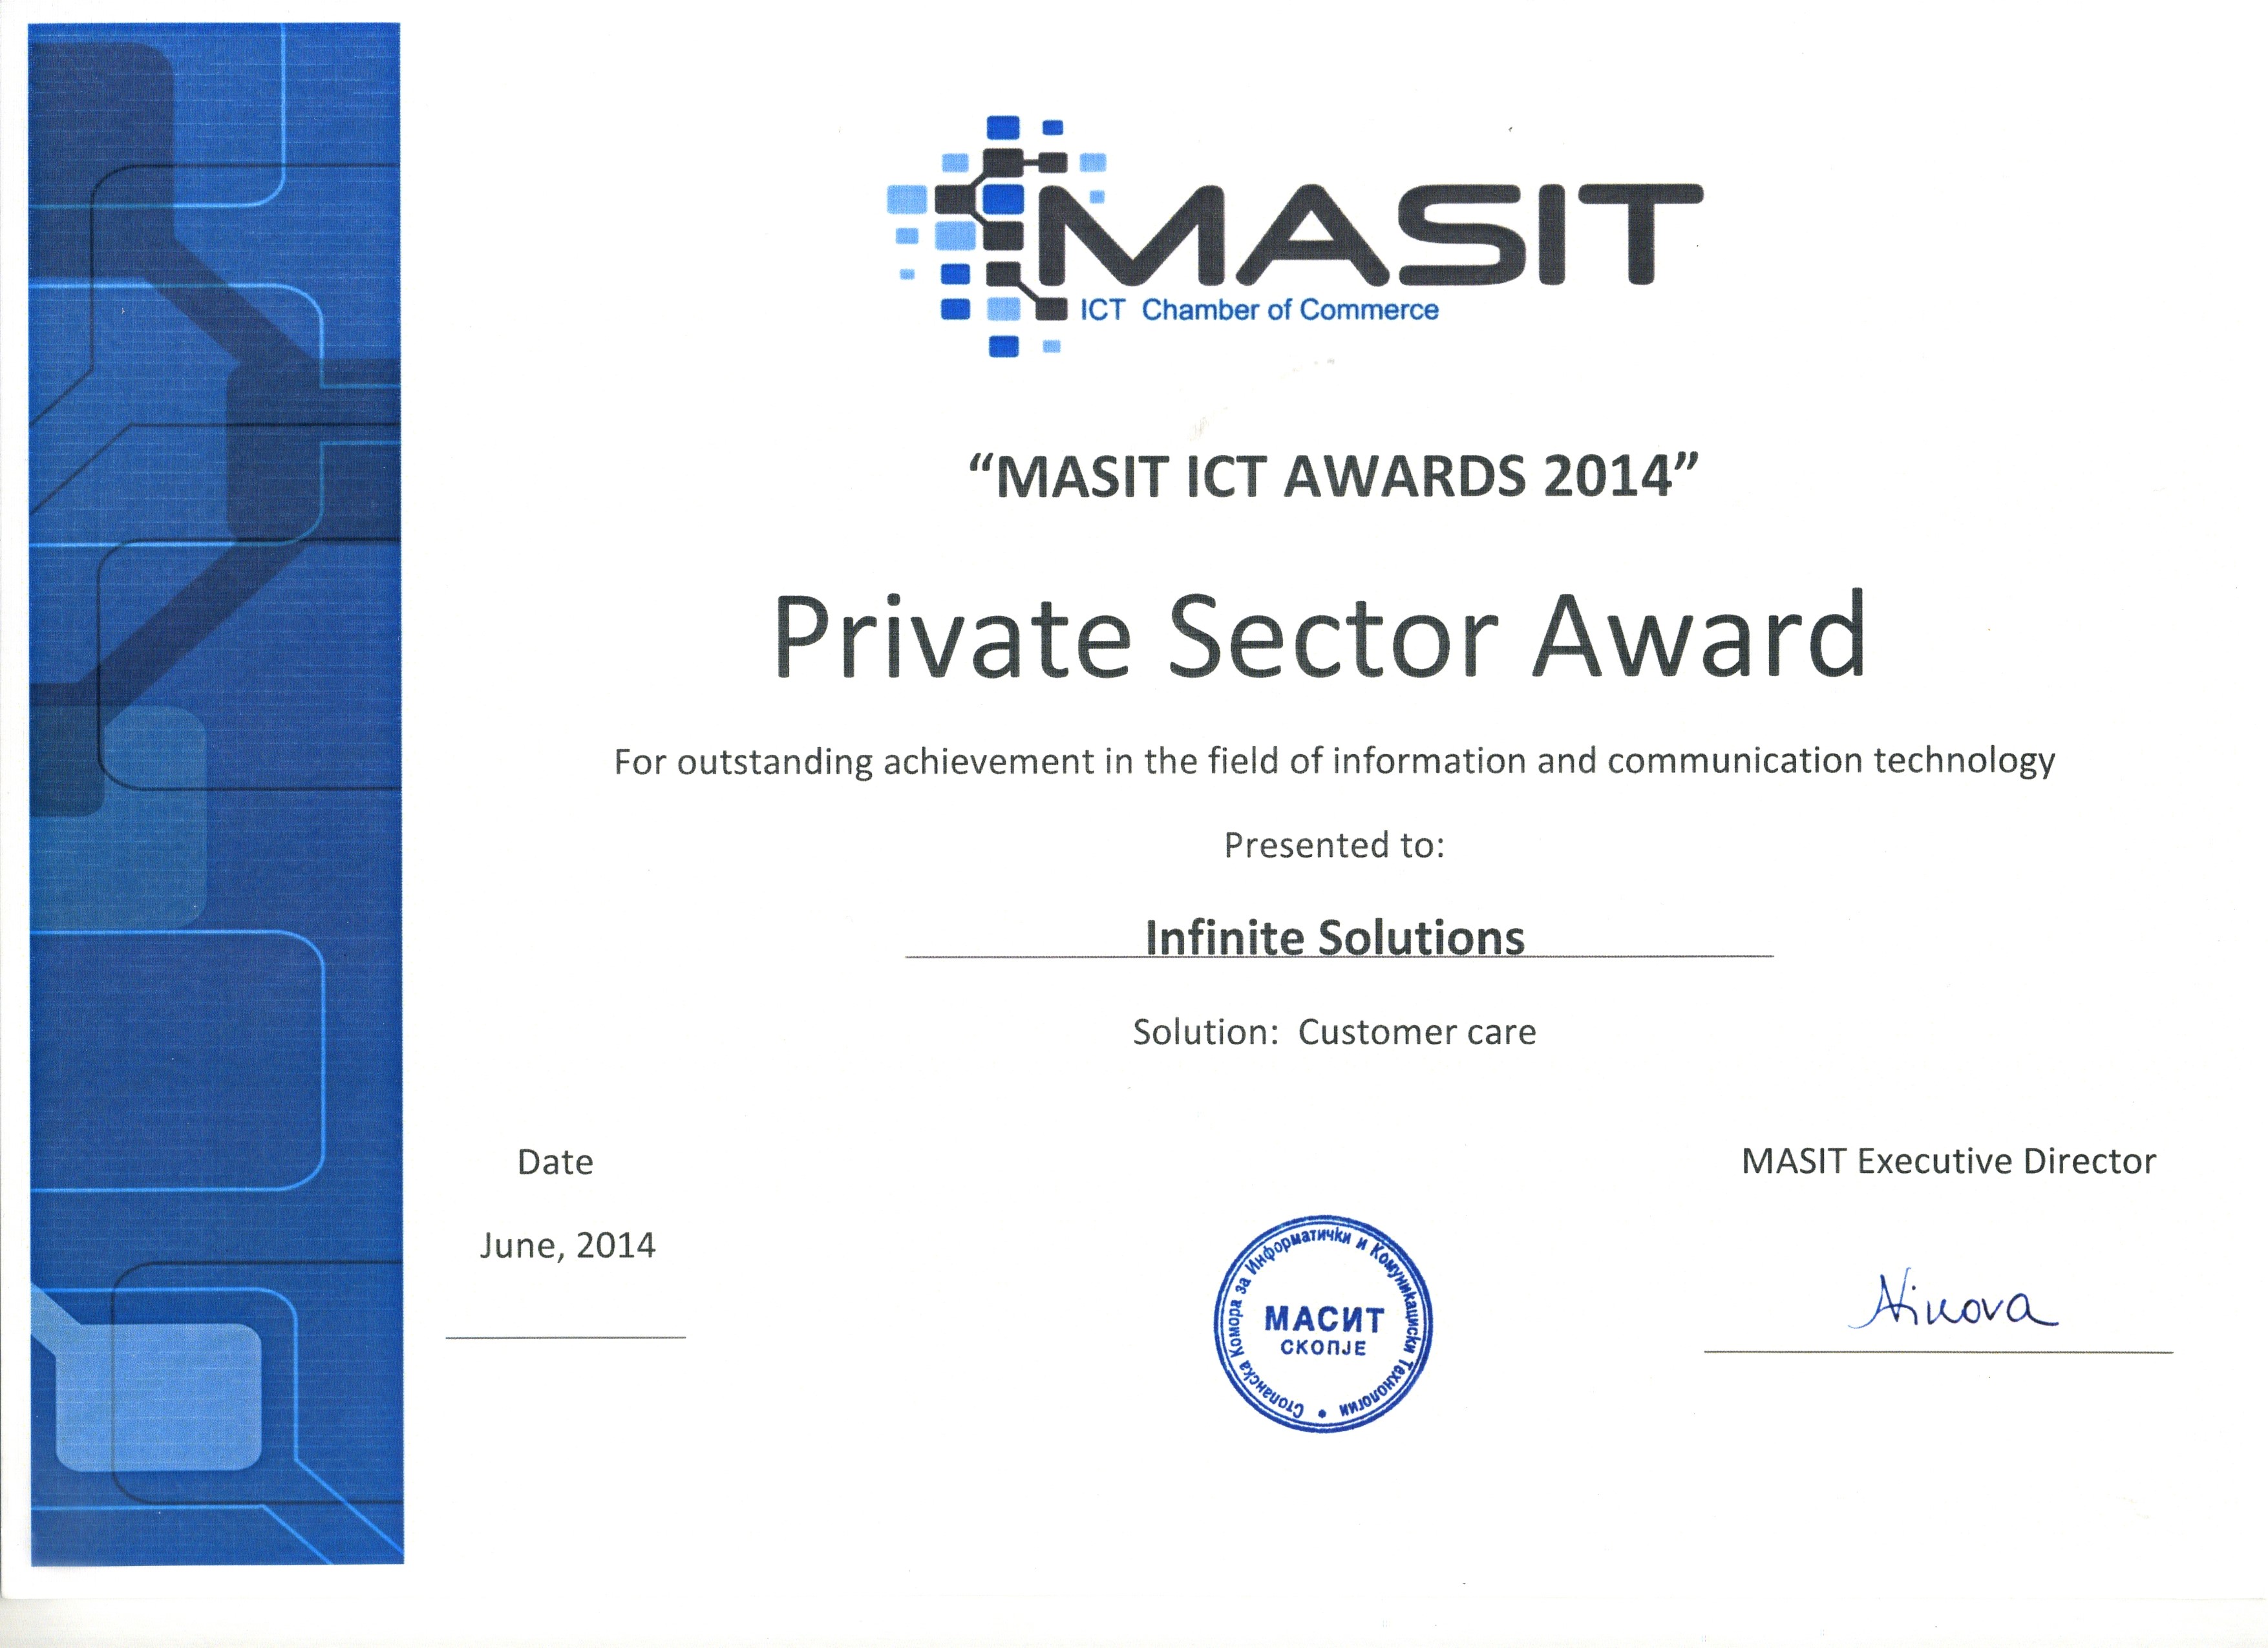 MASIT - Private Sector Award - Infinite Solutions